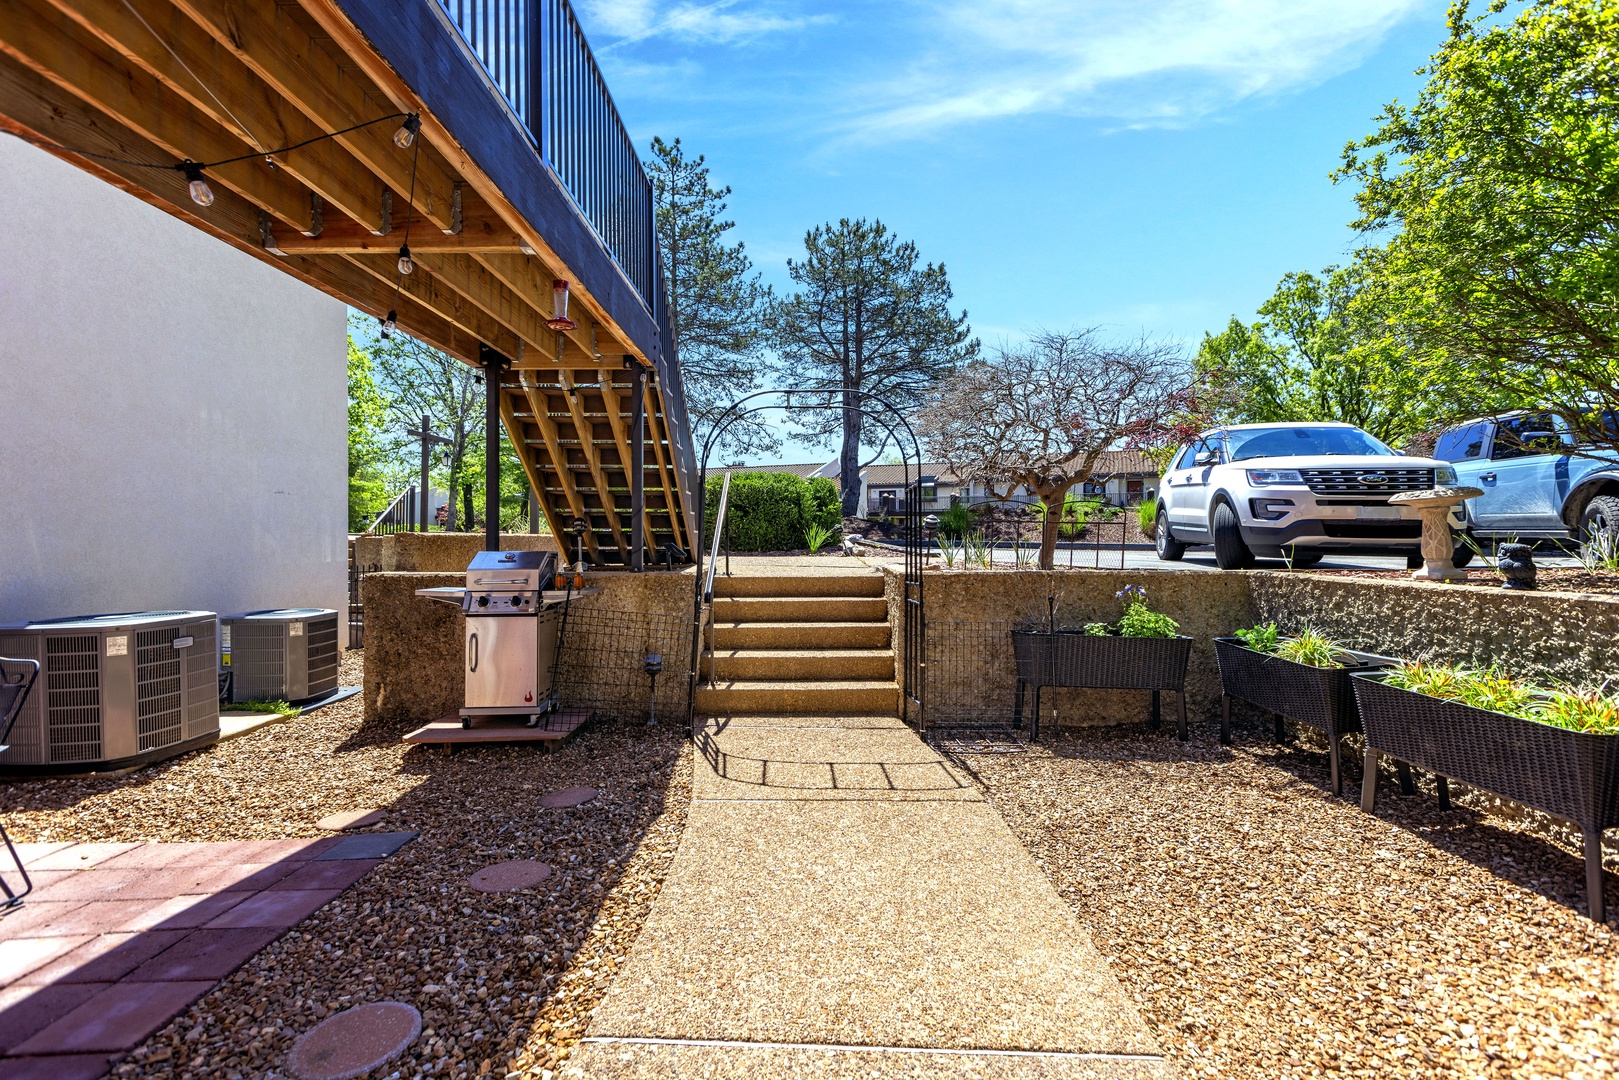 Savor leisurely afternoons on the patio, complete with a grill for outdoor cooking